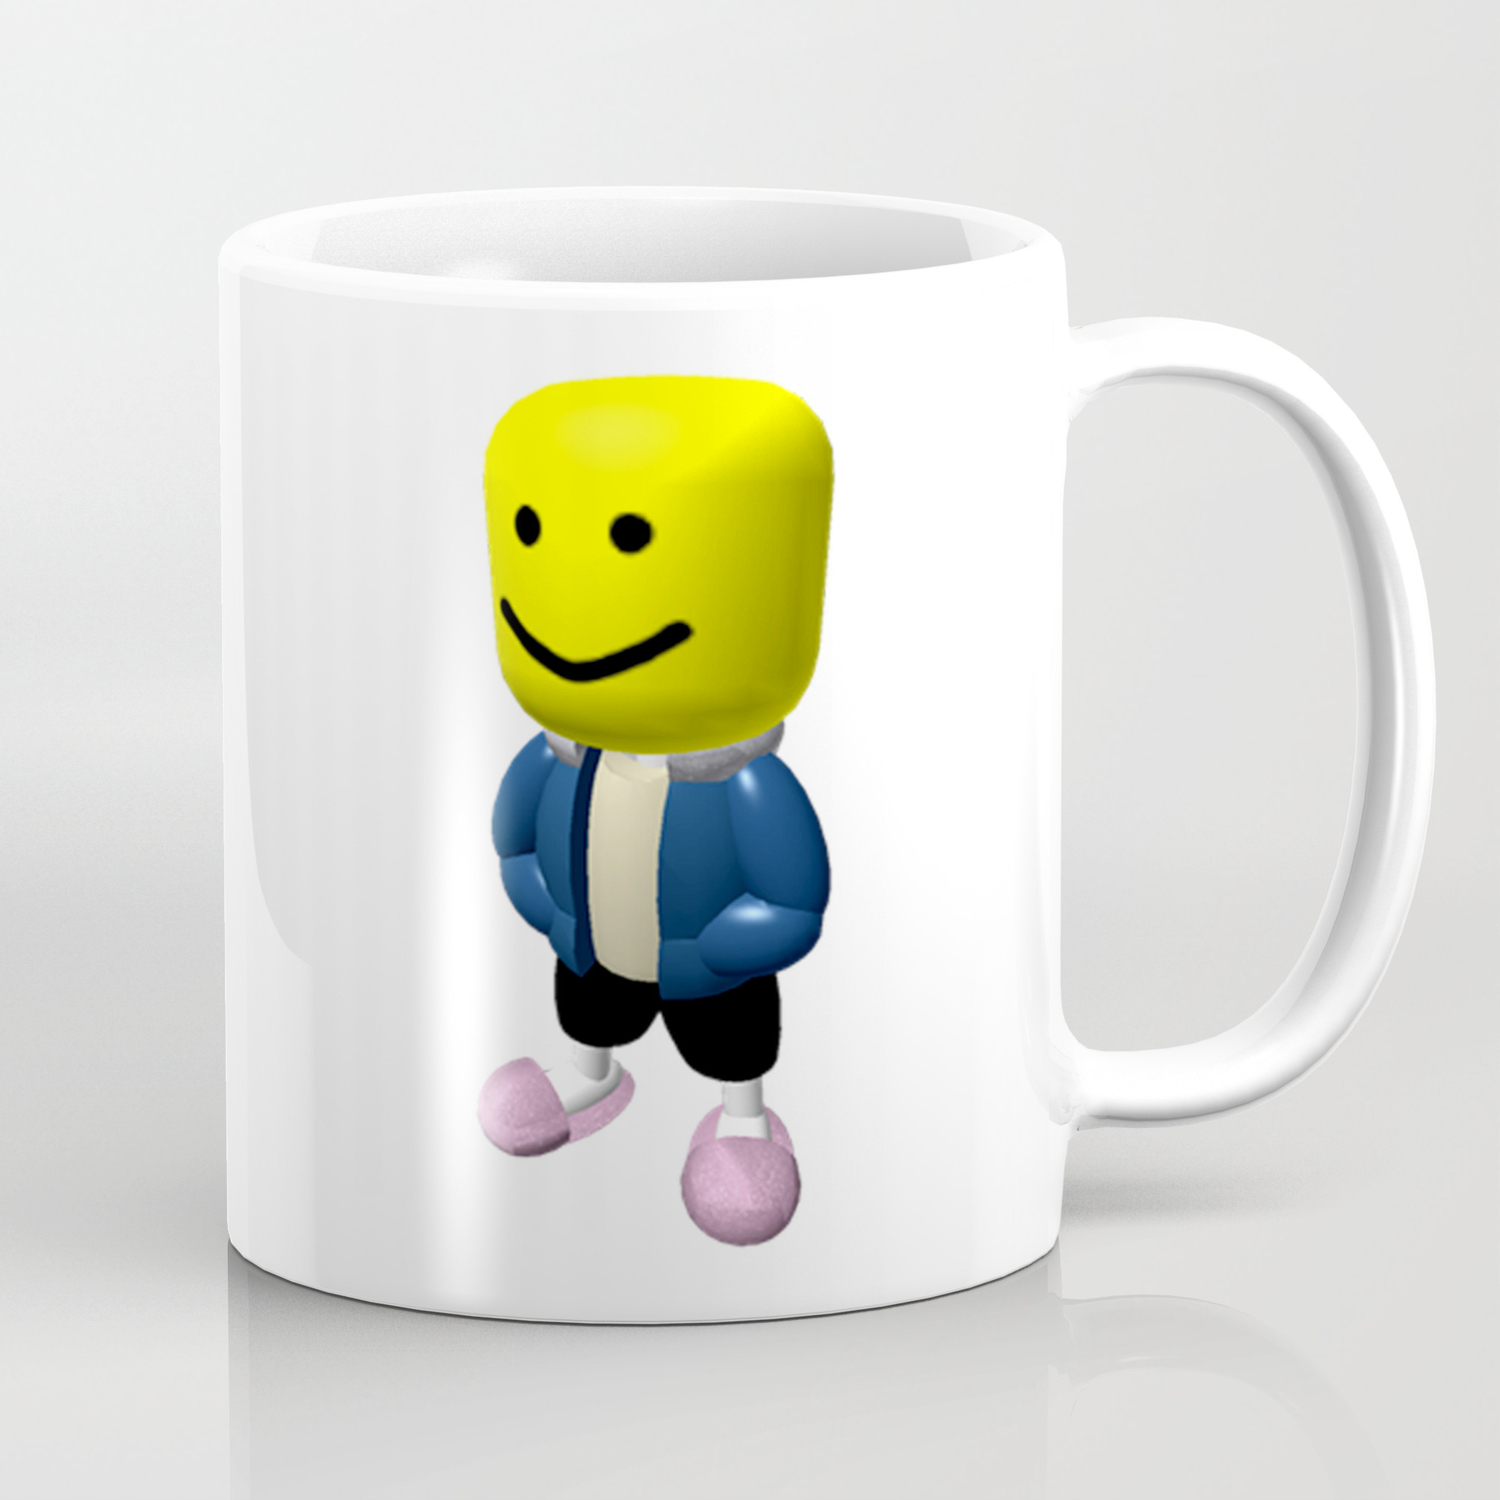 Roblox Mug Robux Hack Without Verification - save guava juice from the clown roblox